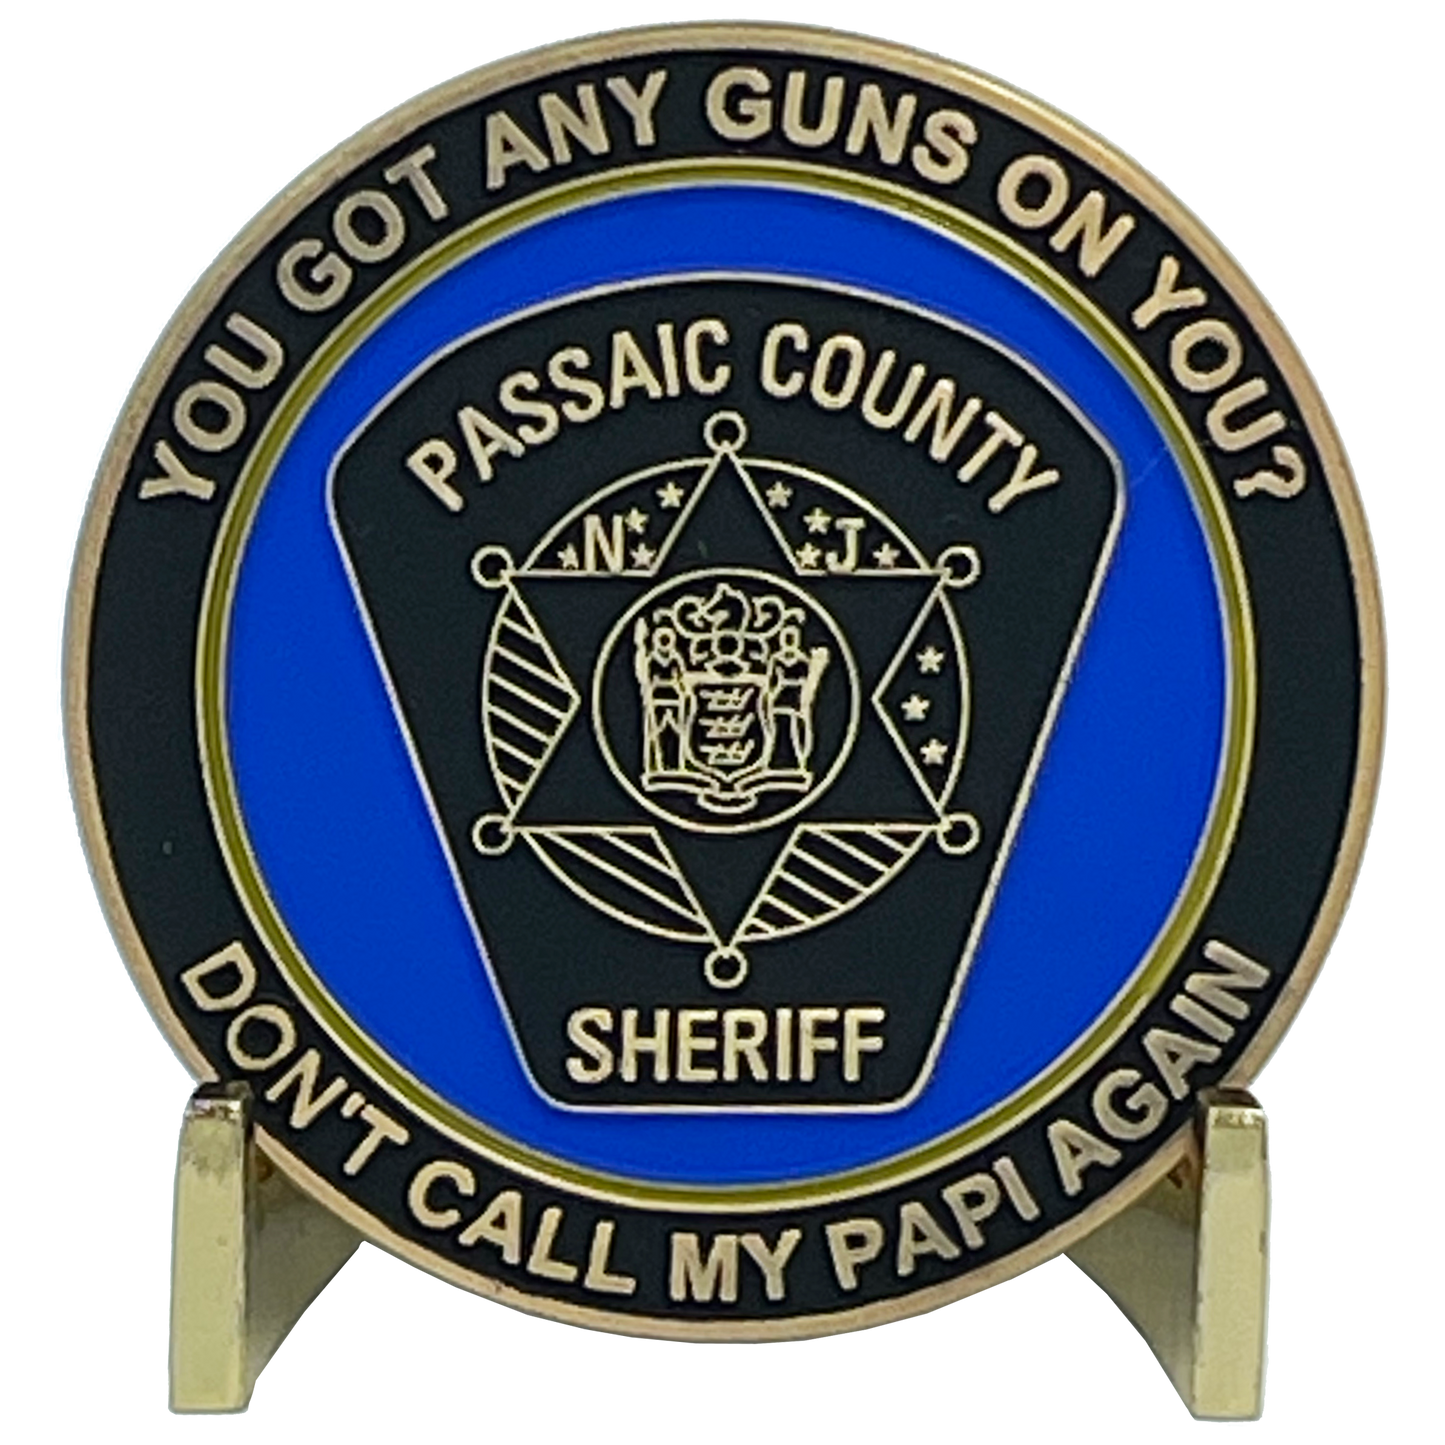 BL9-008 I AIN'T YOUR PAPI Passaic County Sheriff Challenge Coin 911 COPS inspired by Officer Anthony Damiano